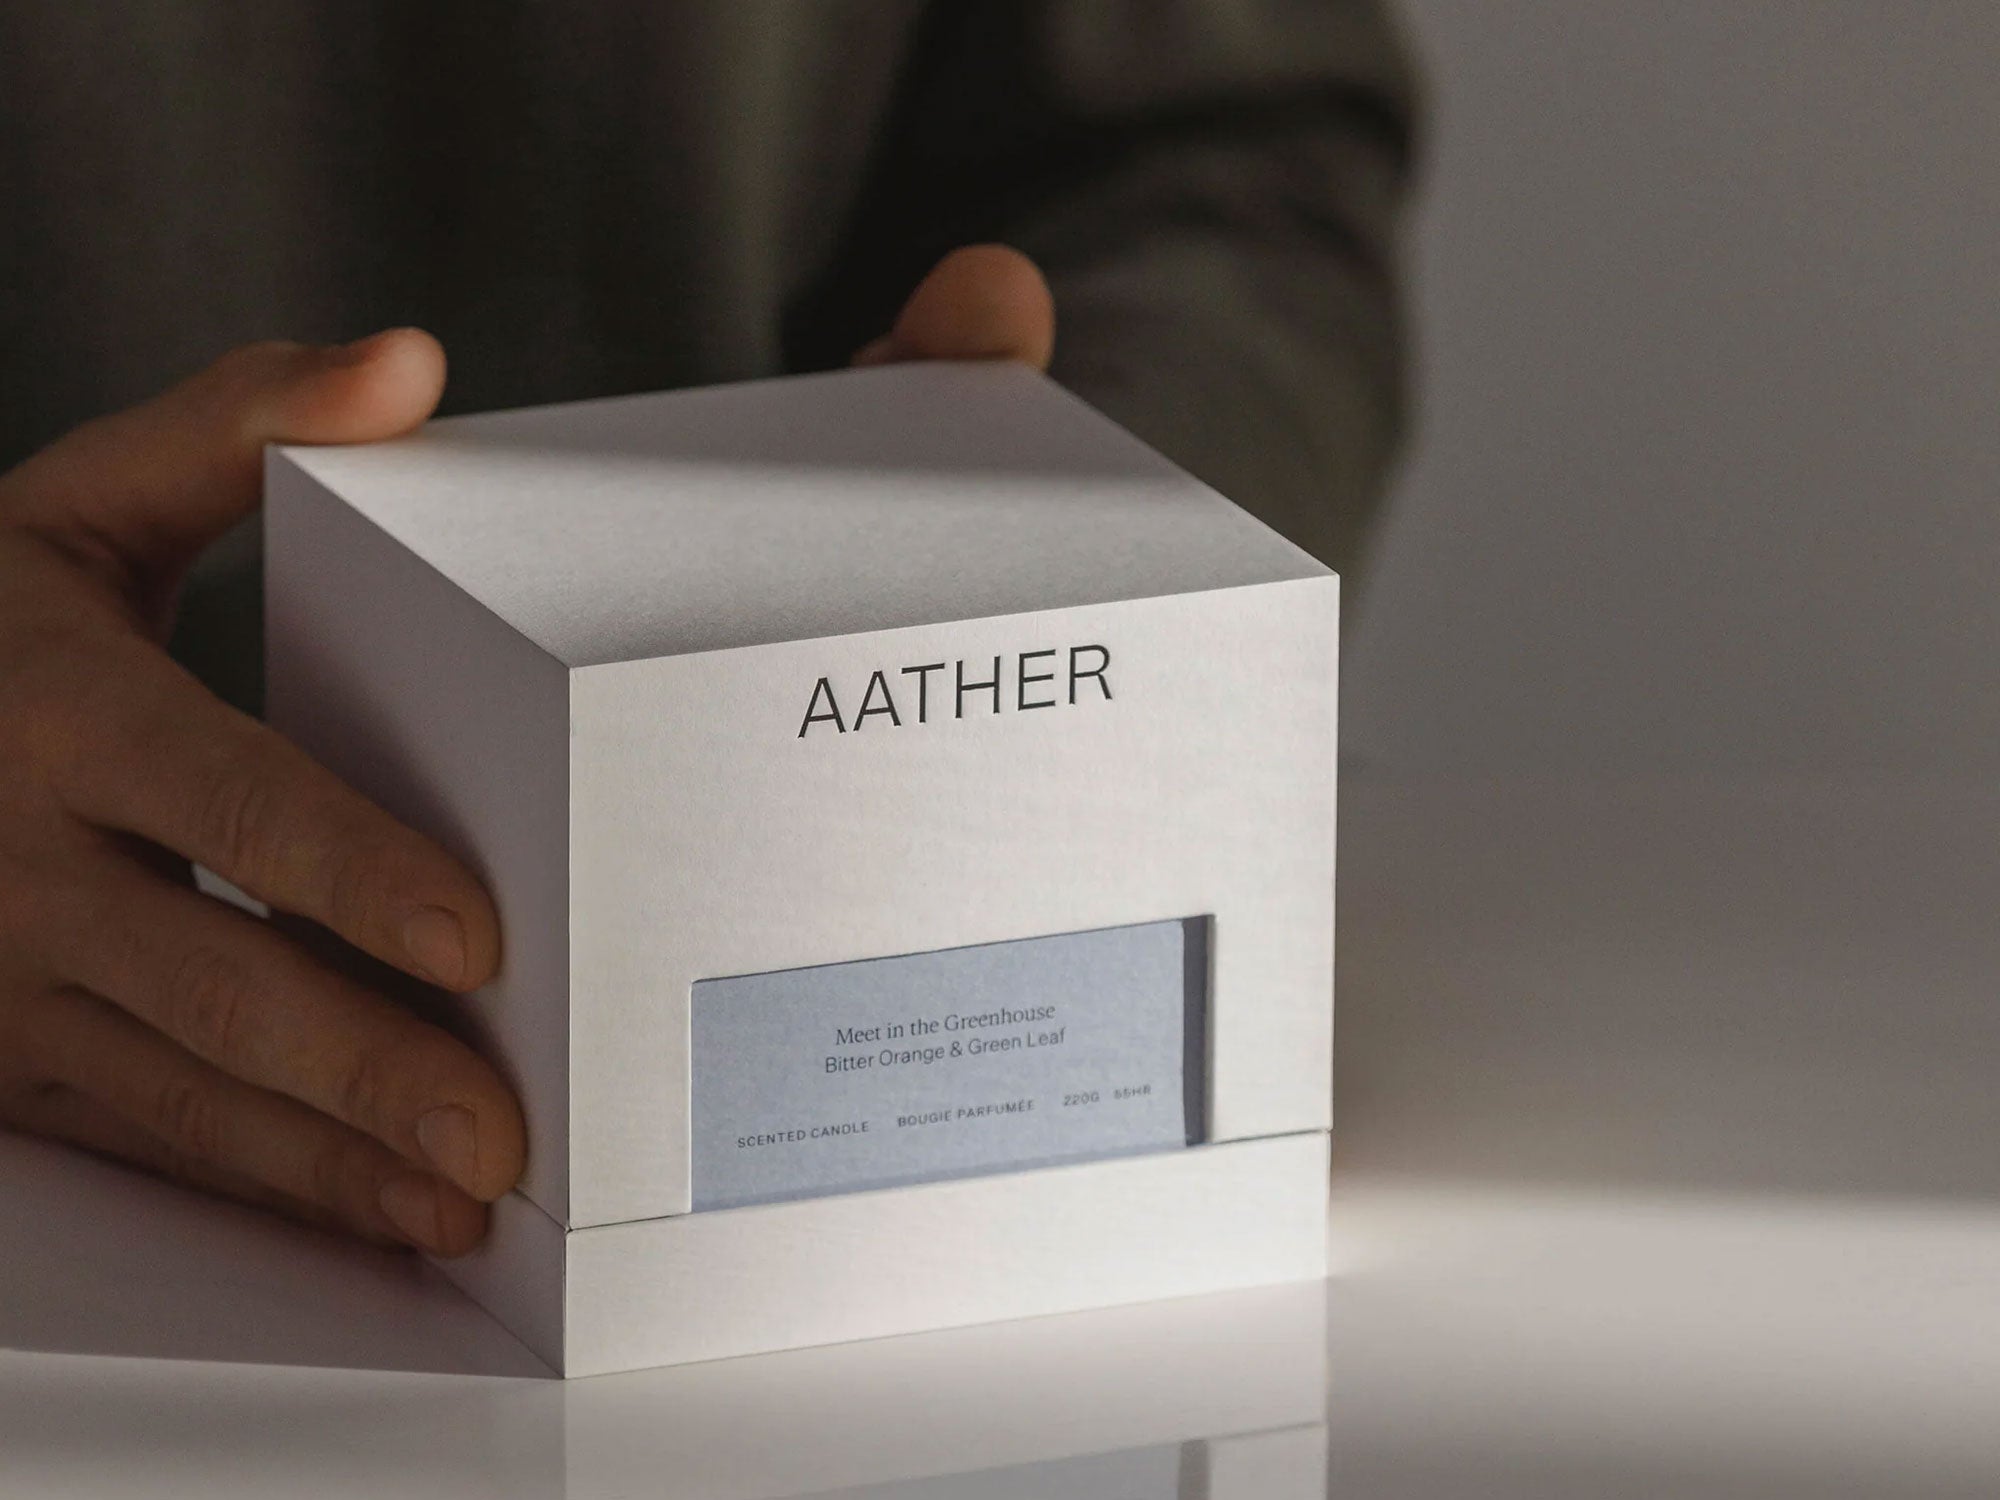 NEW BRAND "AATHER"